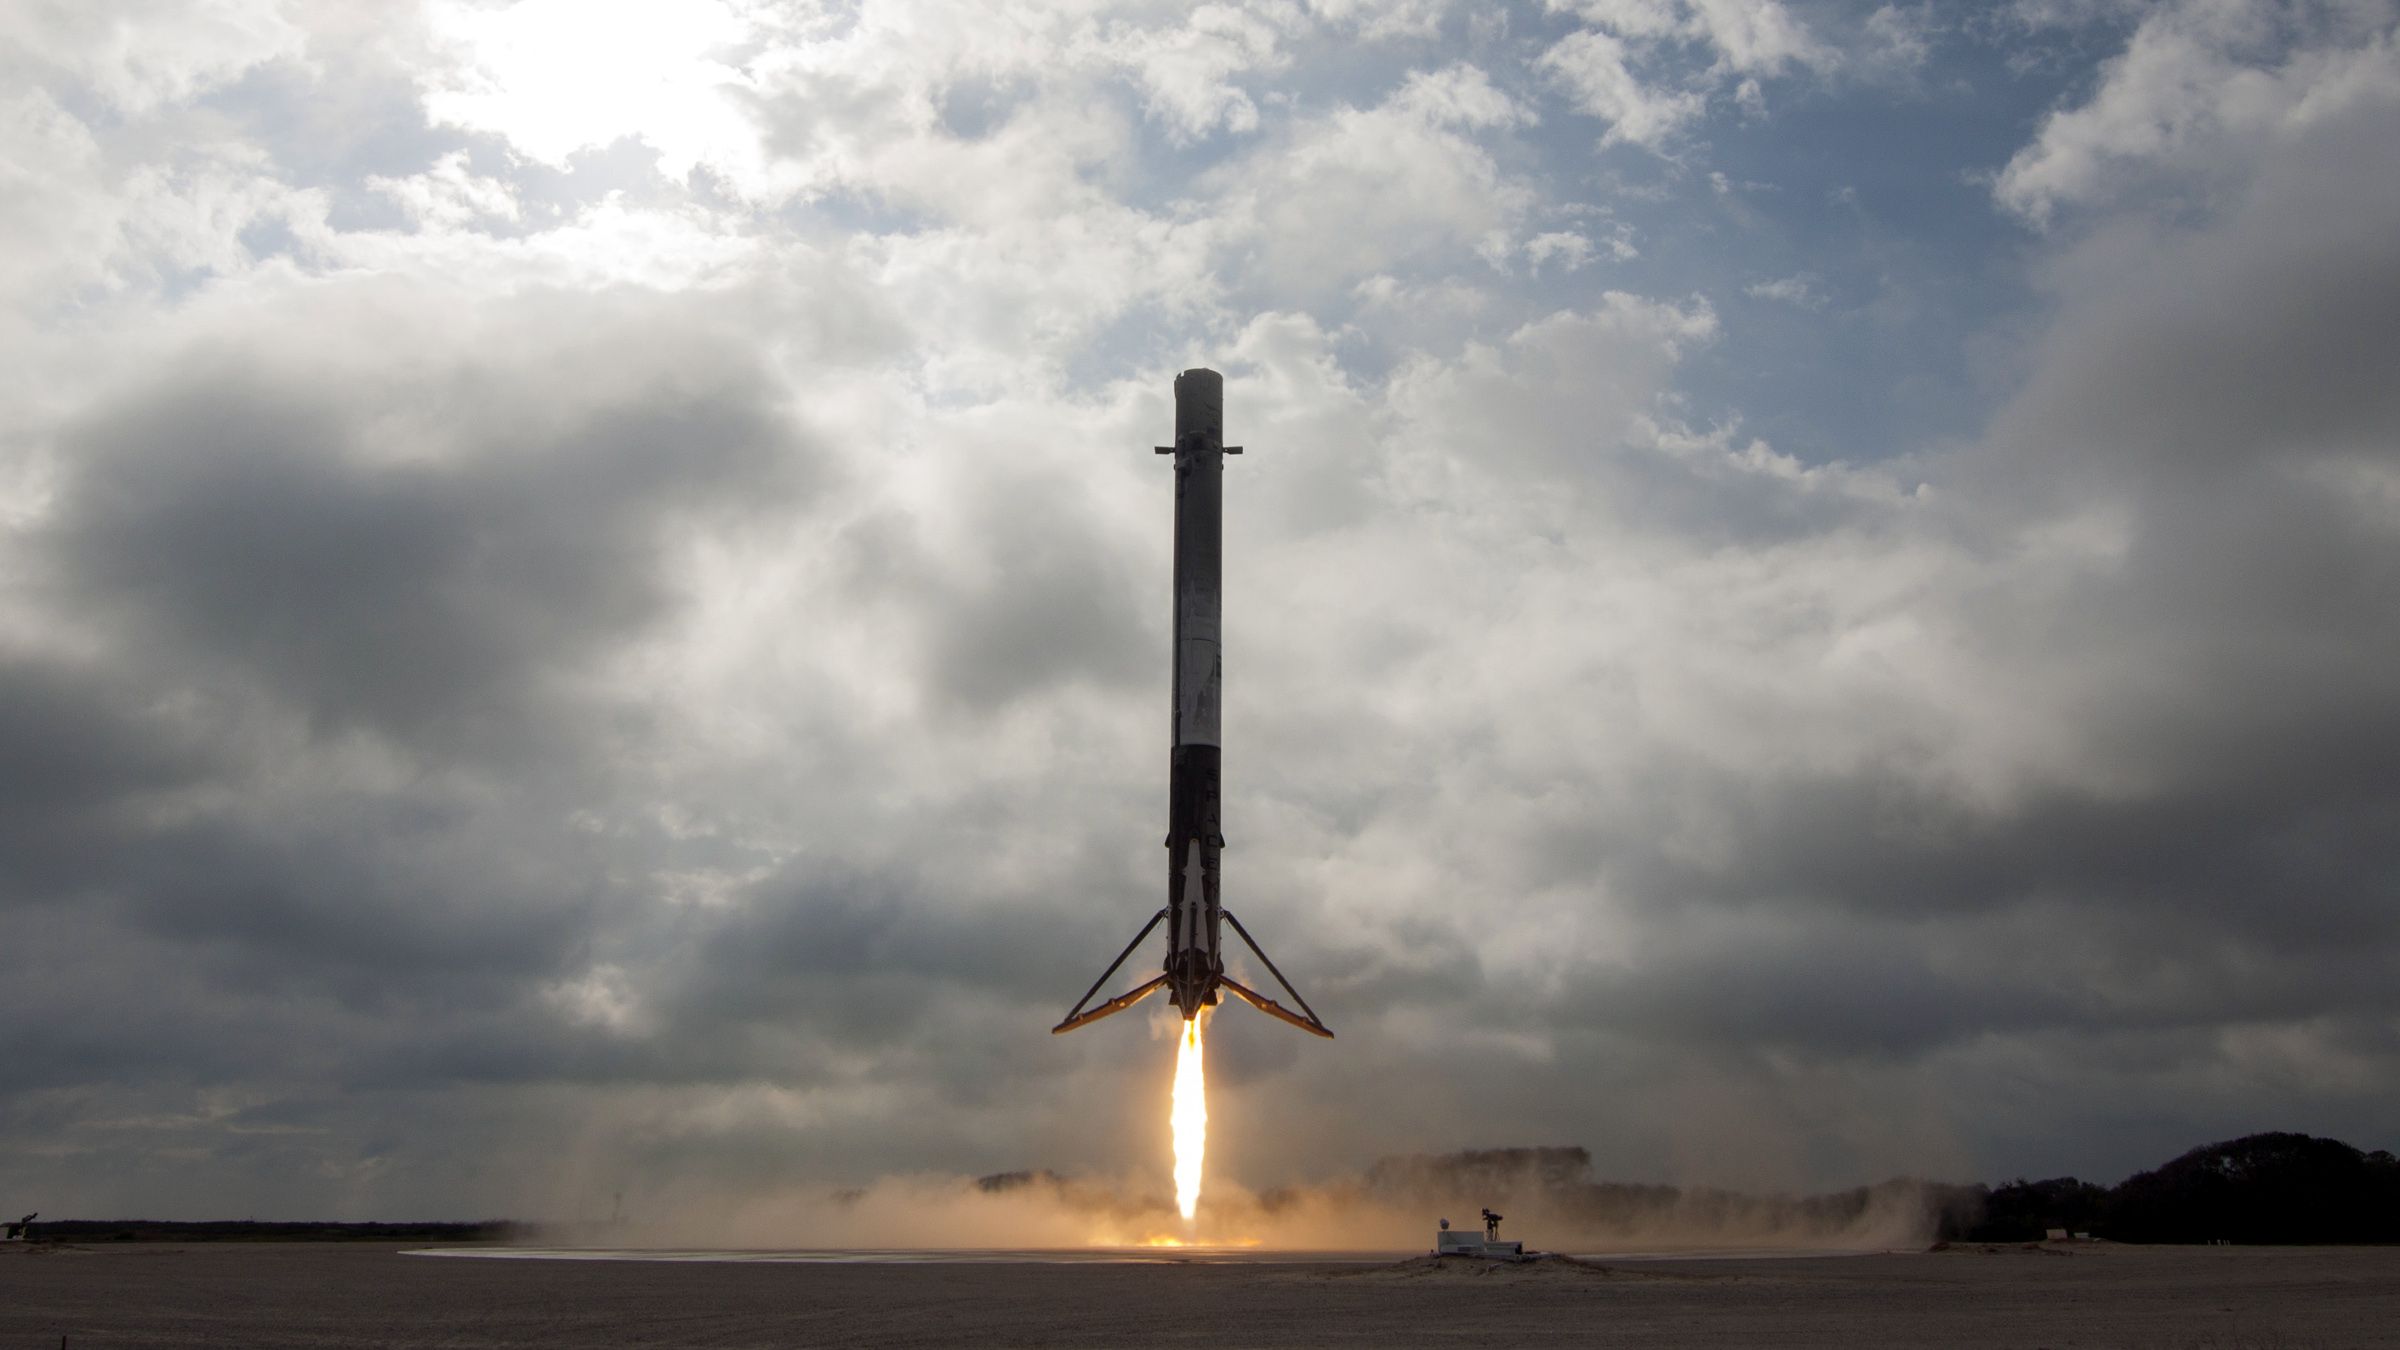 Watch: SpaceX Falcon 9 Rocket Booster Landing Safely After ...